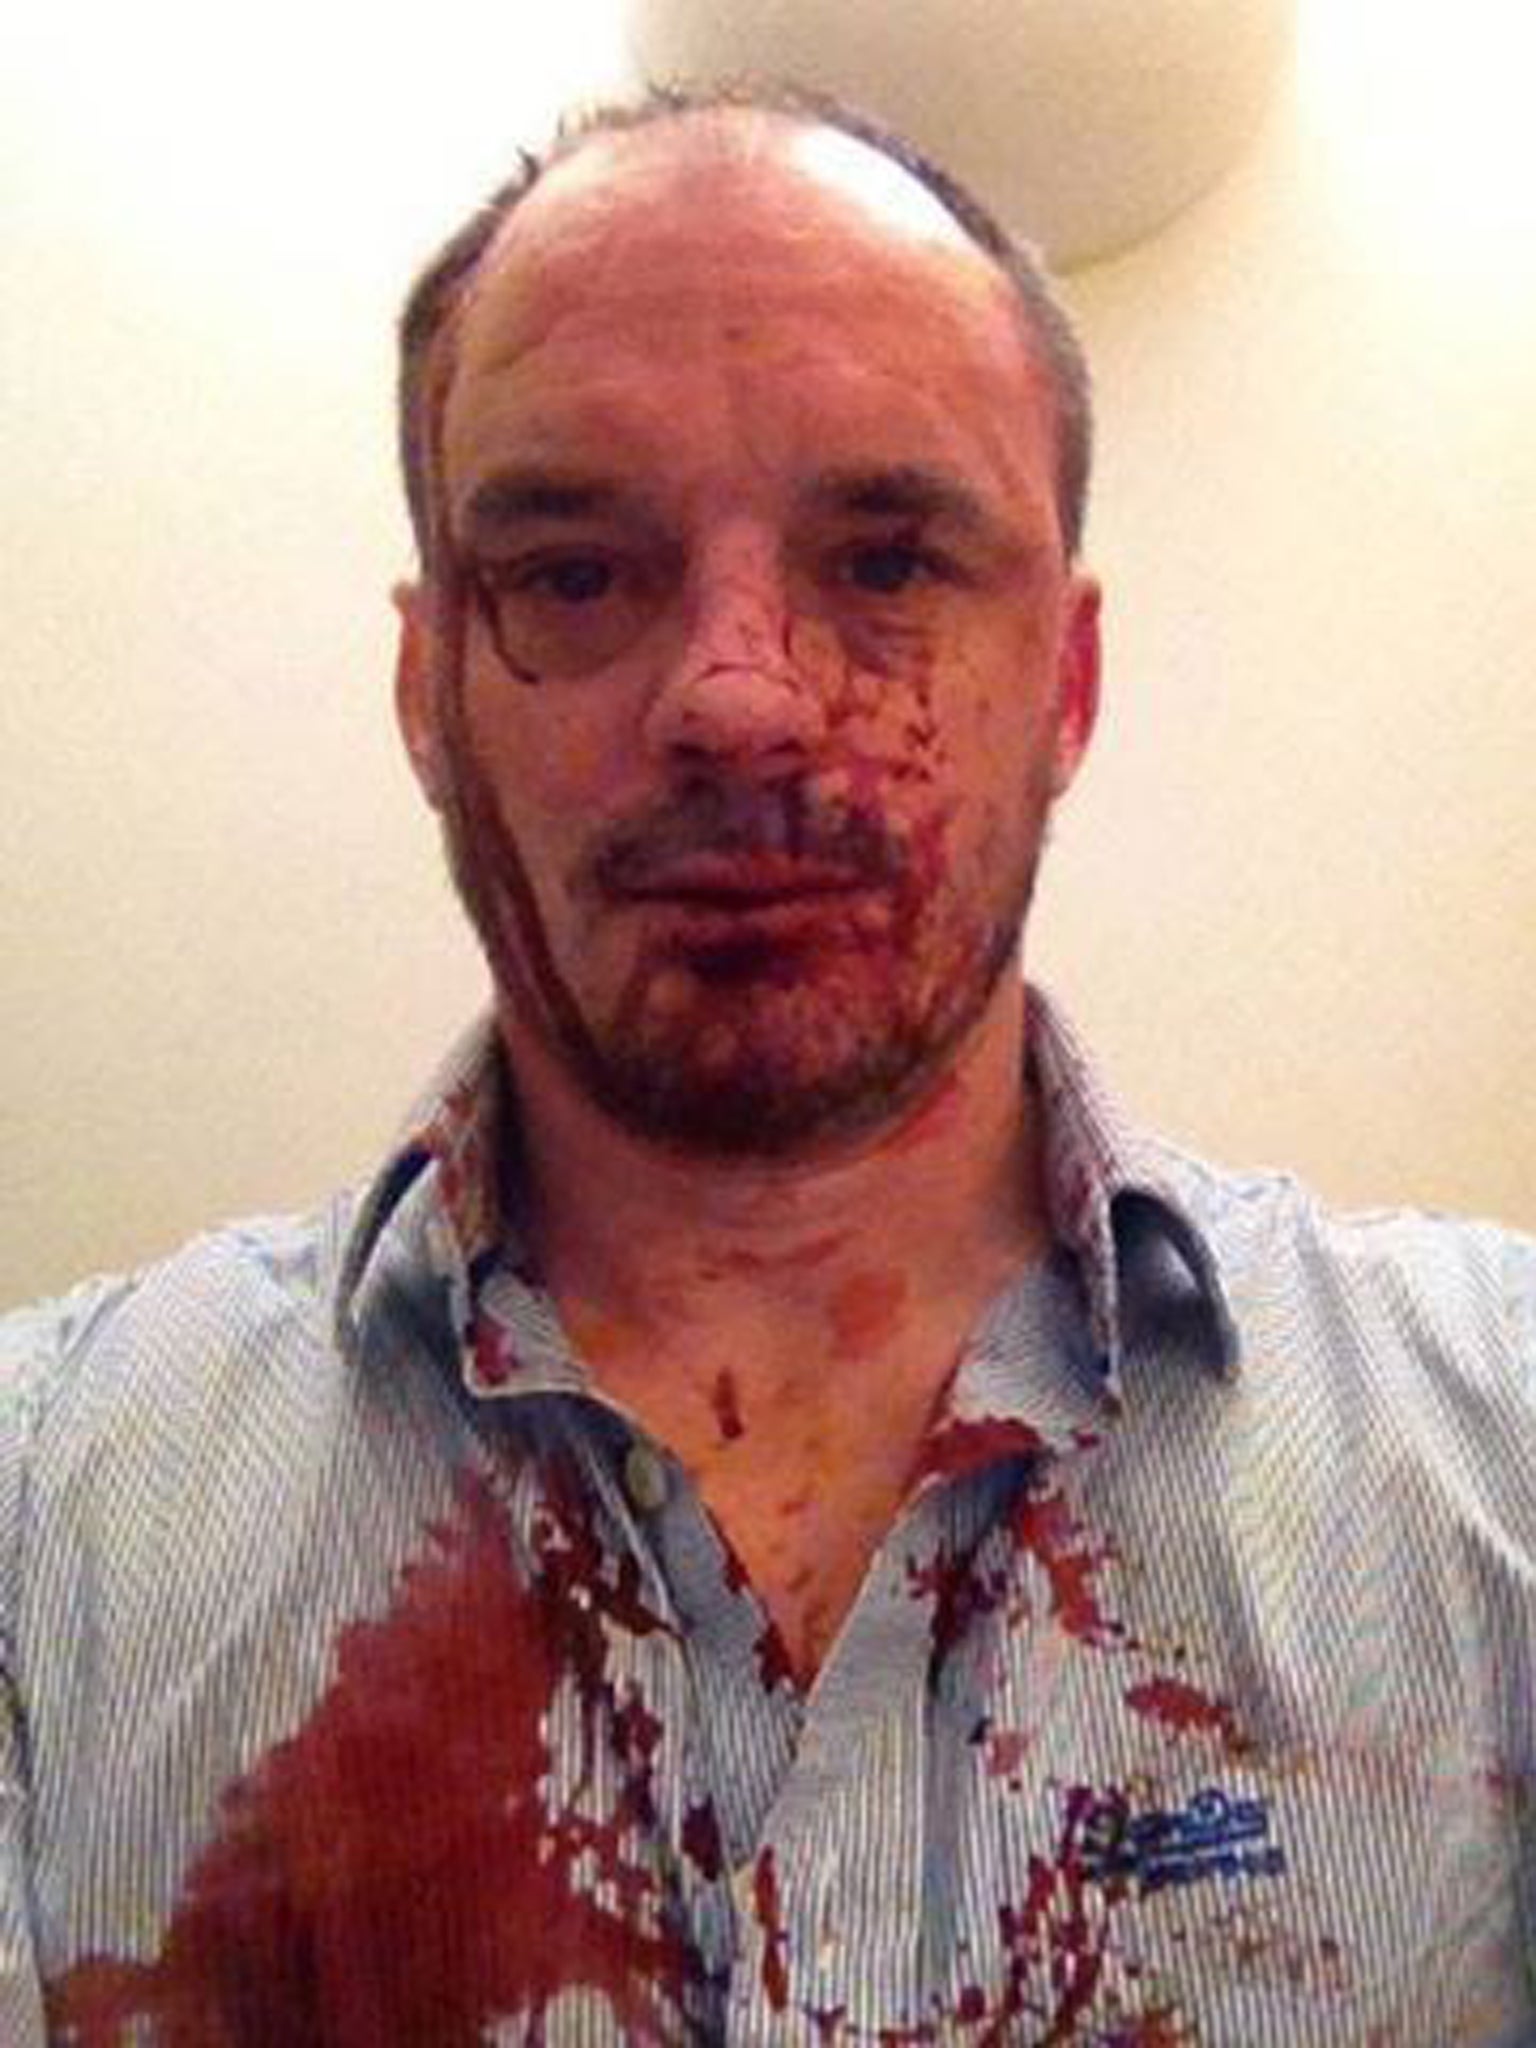 Christopher Bryant, editor of gay and lesbian online magazine Polari, was on his way home from his birthday celebrations with partner Damon Truluck when they were confronted and beaten by a group of six men on Saturday night